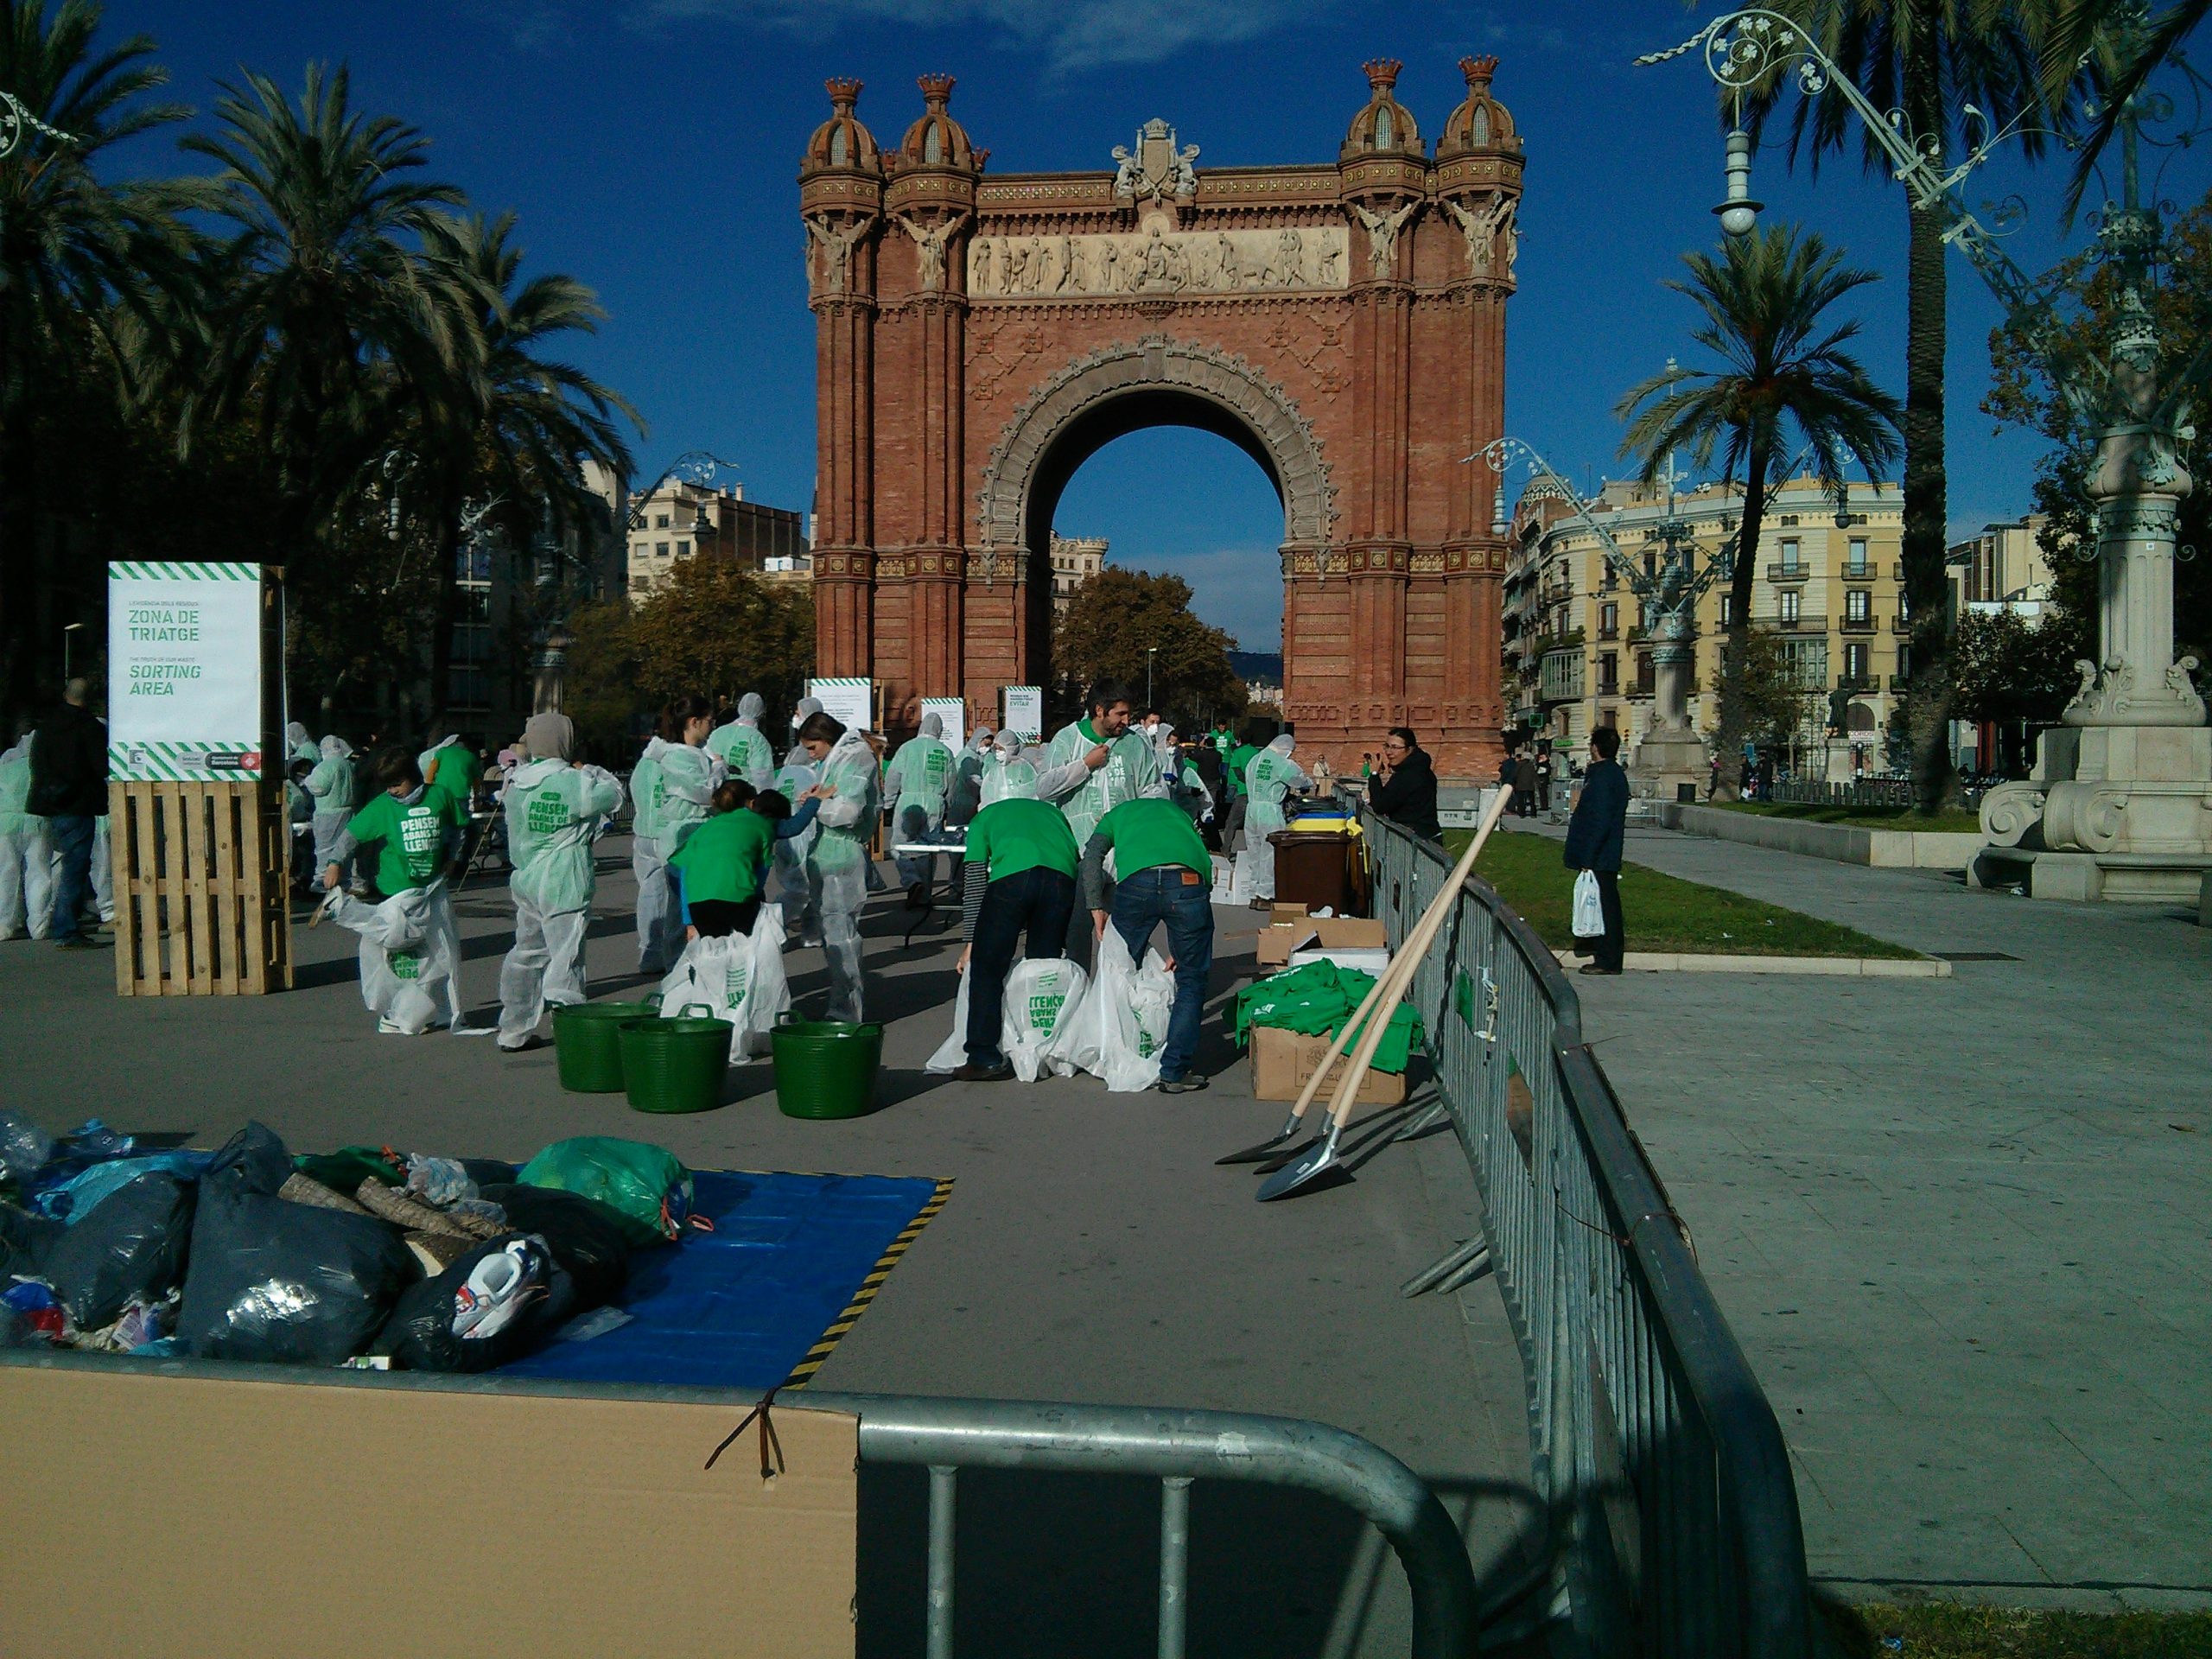 Local residents putting on protective suits surrounded by rubbish bags, preparing for a waste audit in a square in Barcelona